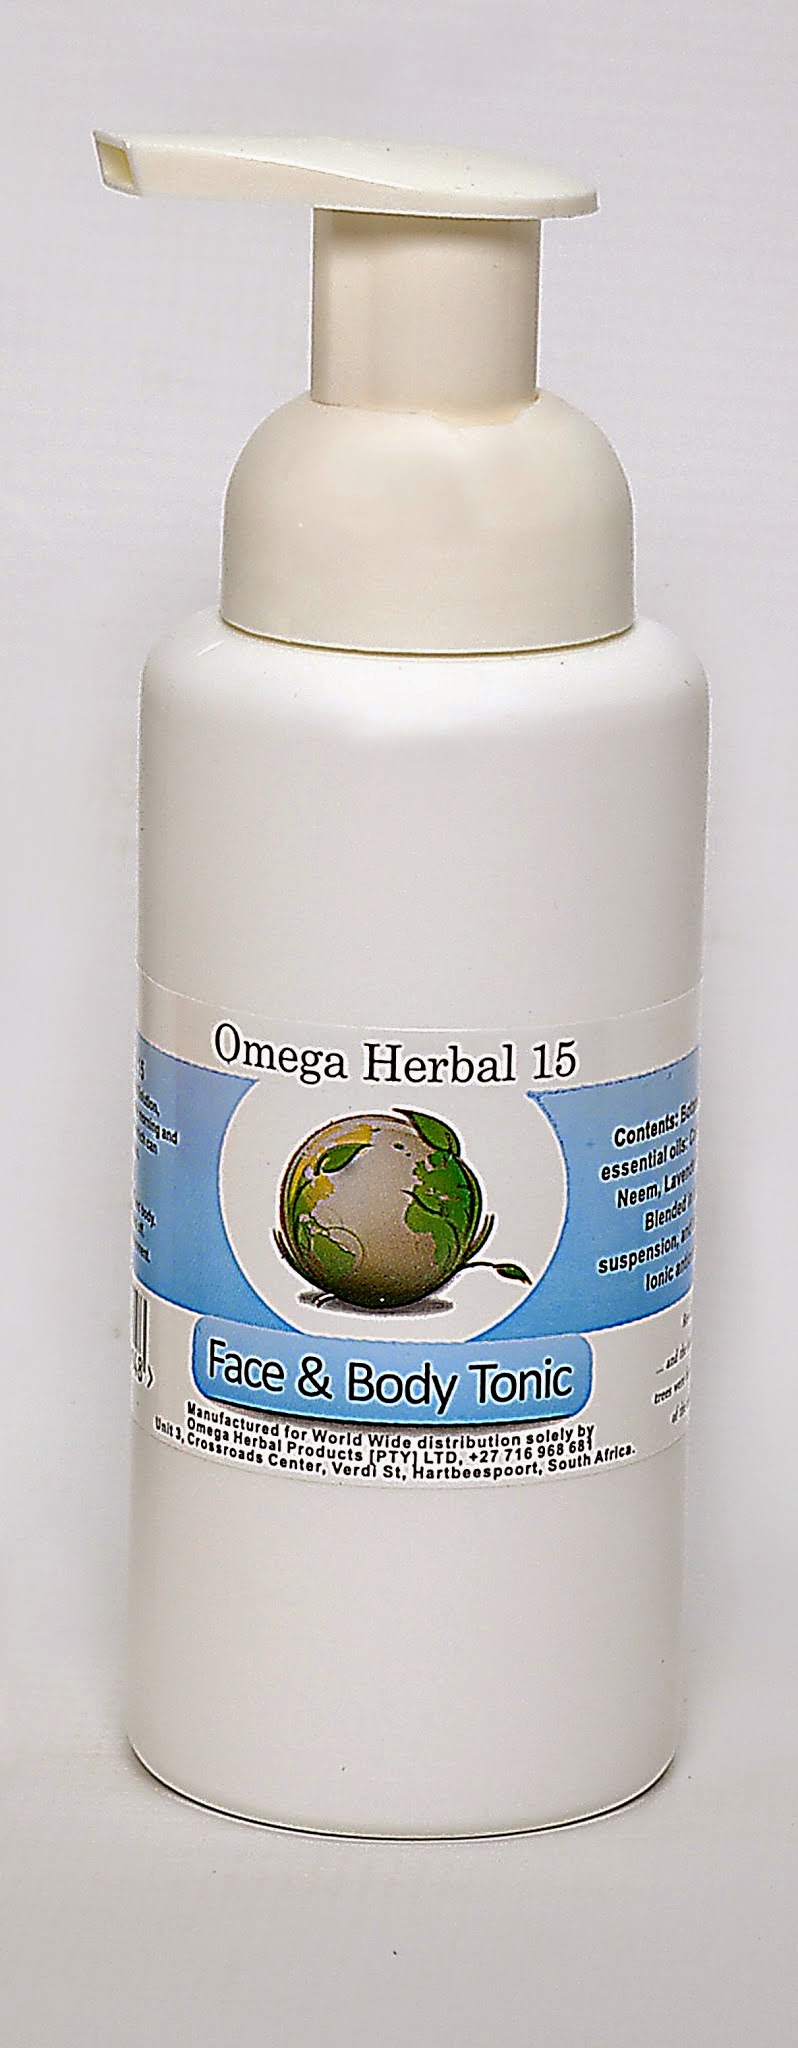 Omega Herbal Products (PTY) LTD